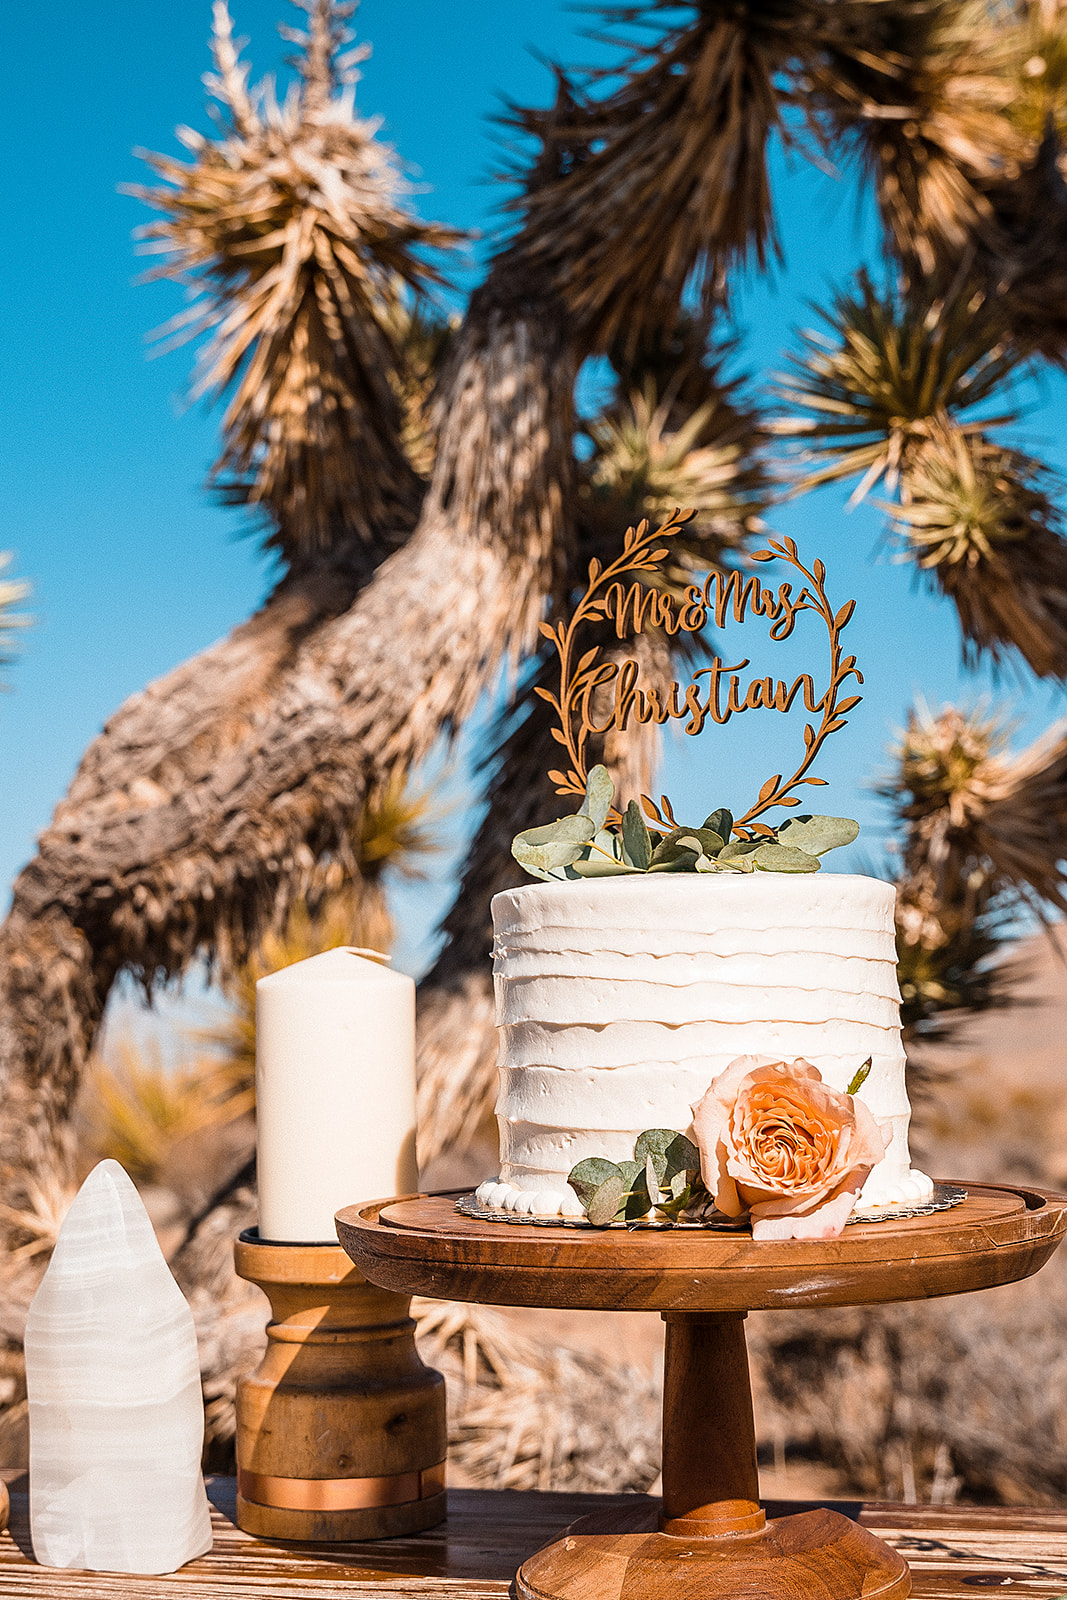 How Much Does It Cost To Get Married In Vegas. Simple wedding cake with cake topper placed on wooden tray.